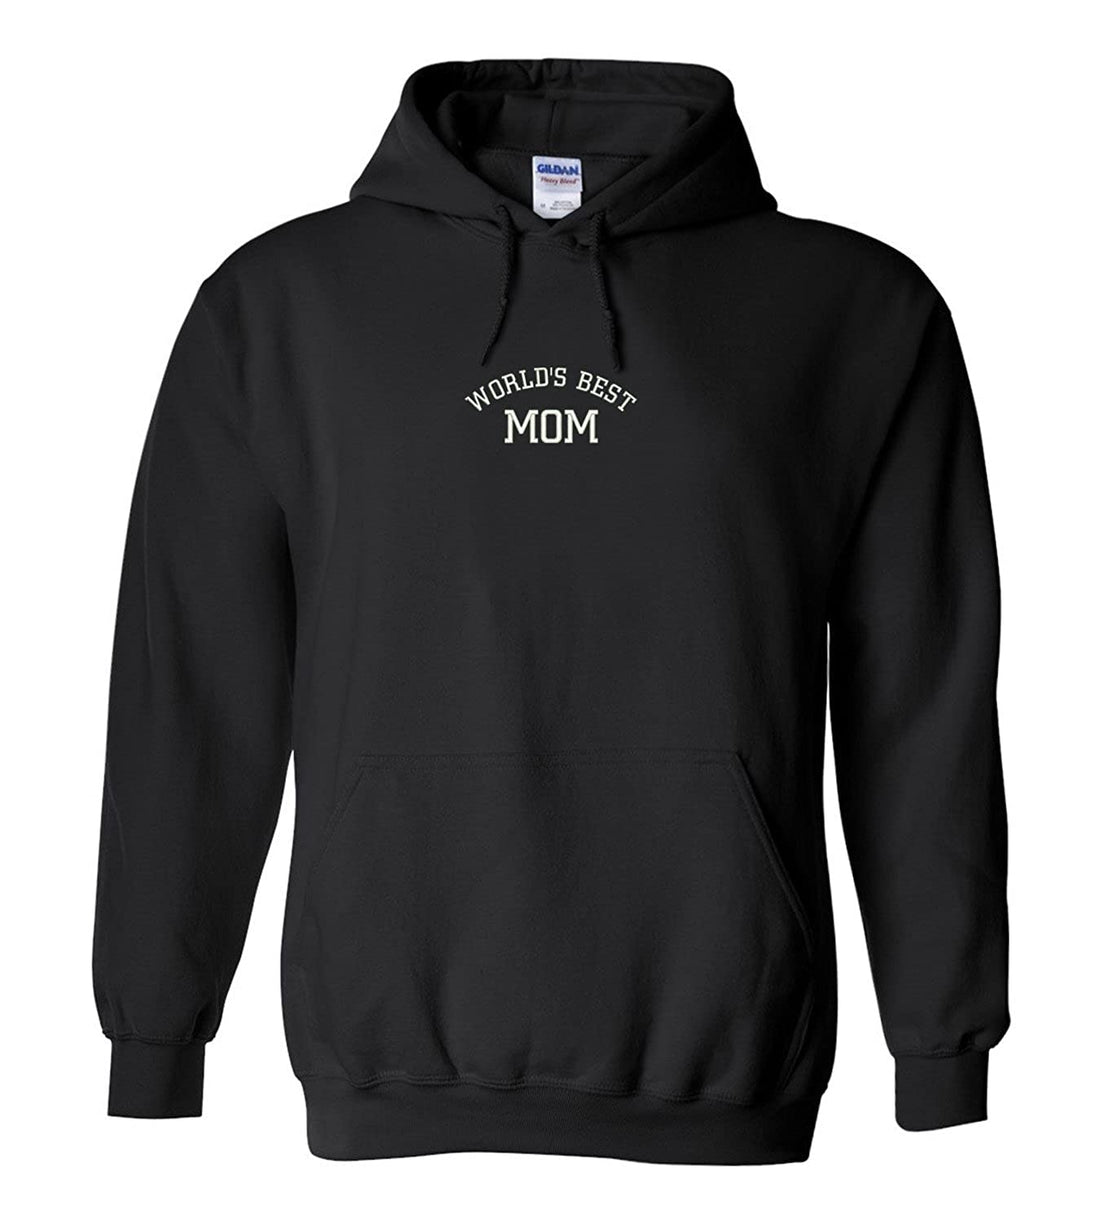 Trendy Apparel Shop World's Best Mom Embroidered Heavy Blend Hoodie - Black - 2XL